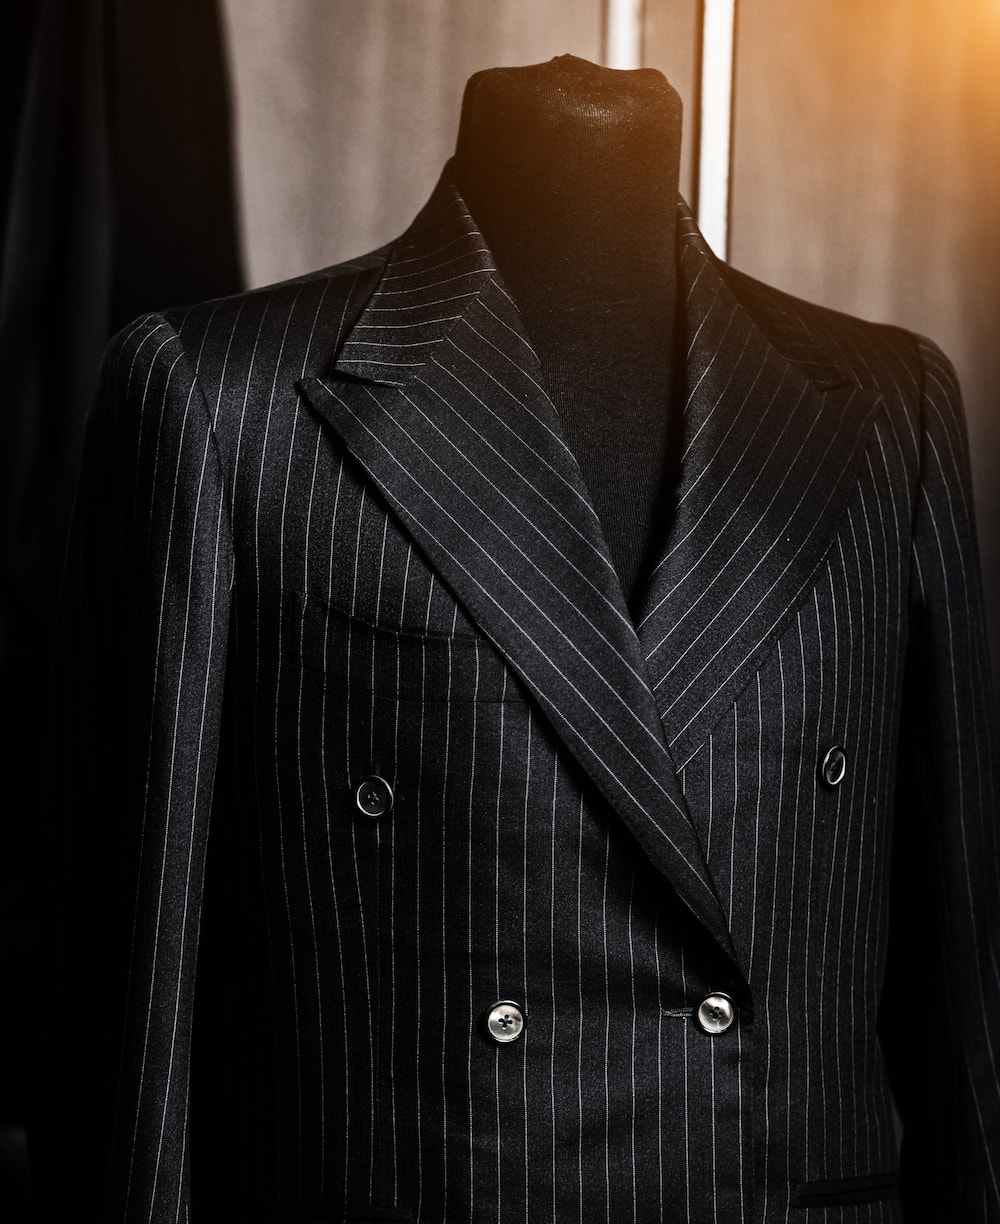 Top 10 most expensive suits in the world